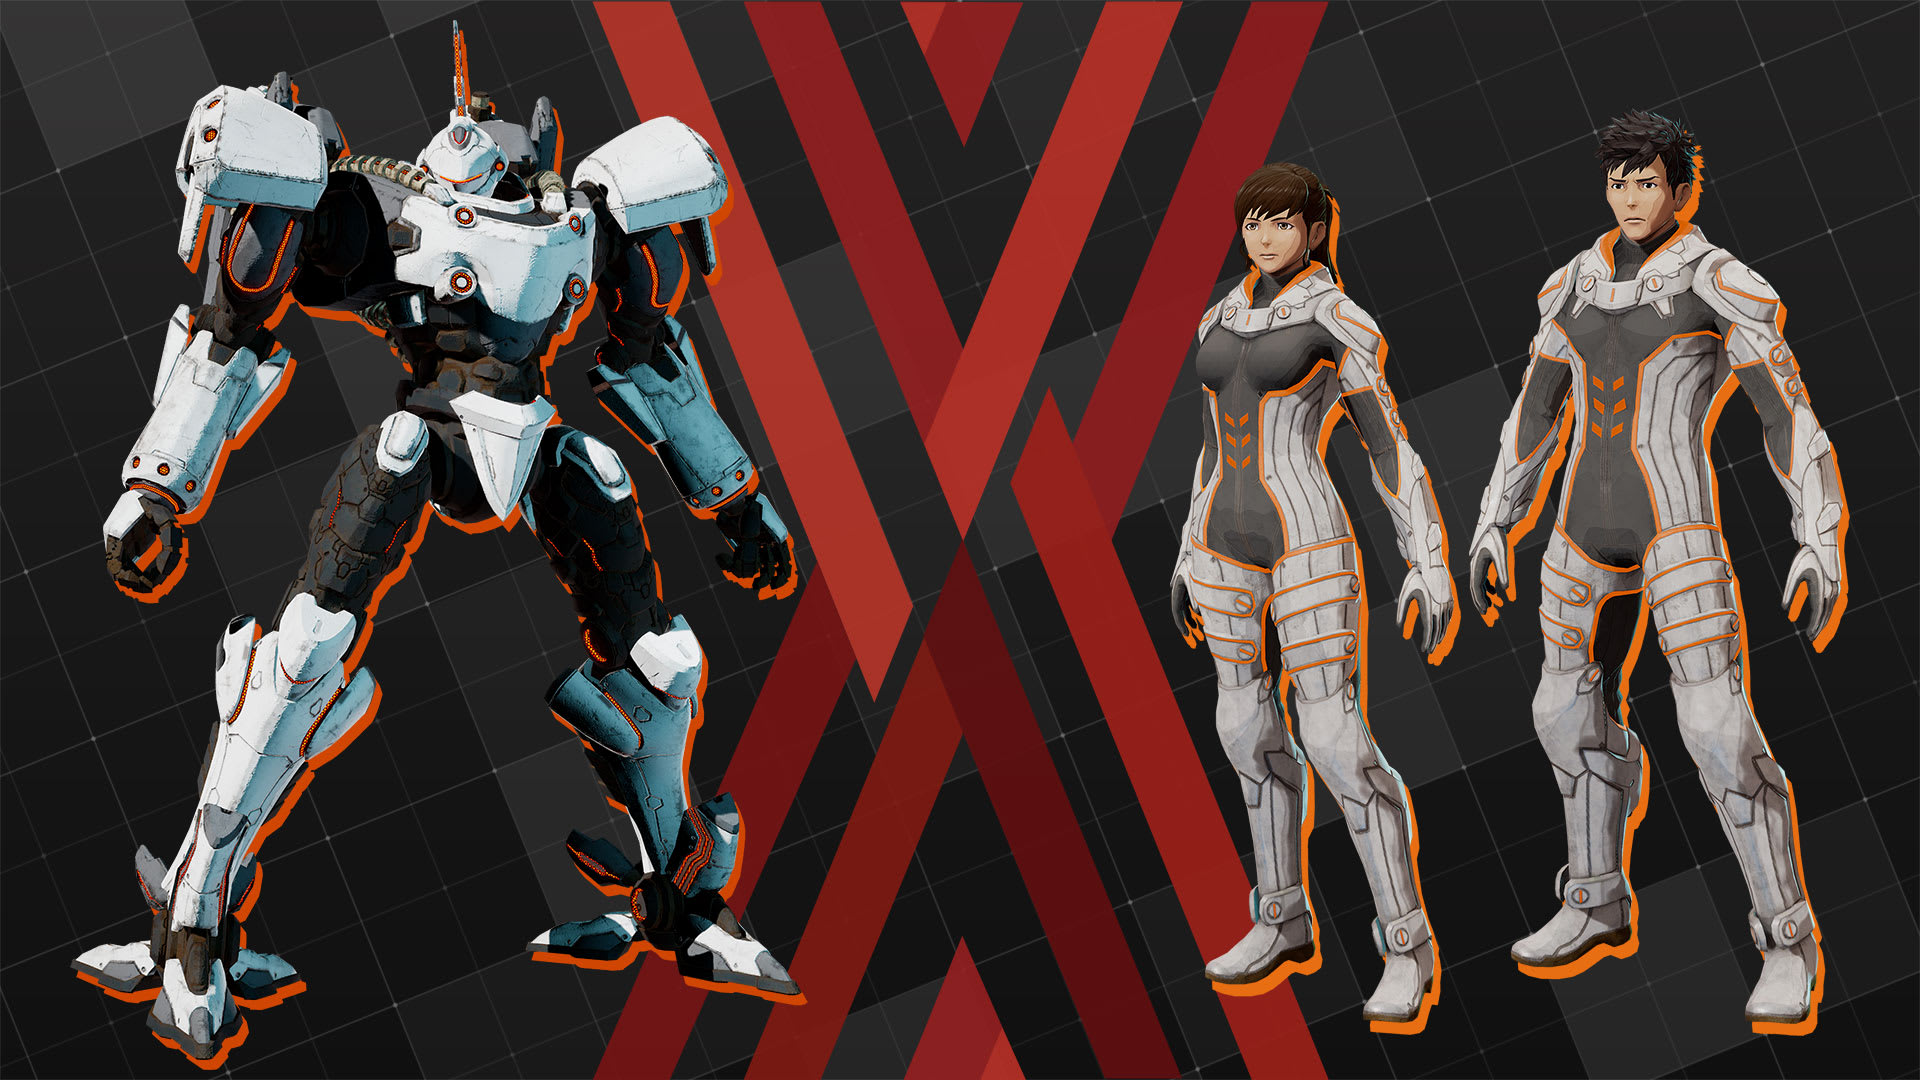 Arsenal "Prototype Arsenal"
Suit for Outer: "Prototype Suit" (Male & Female)